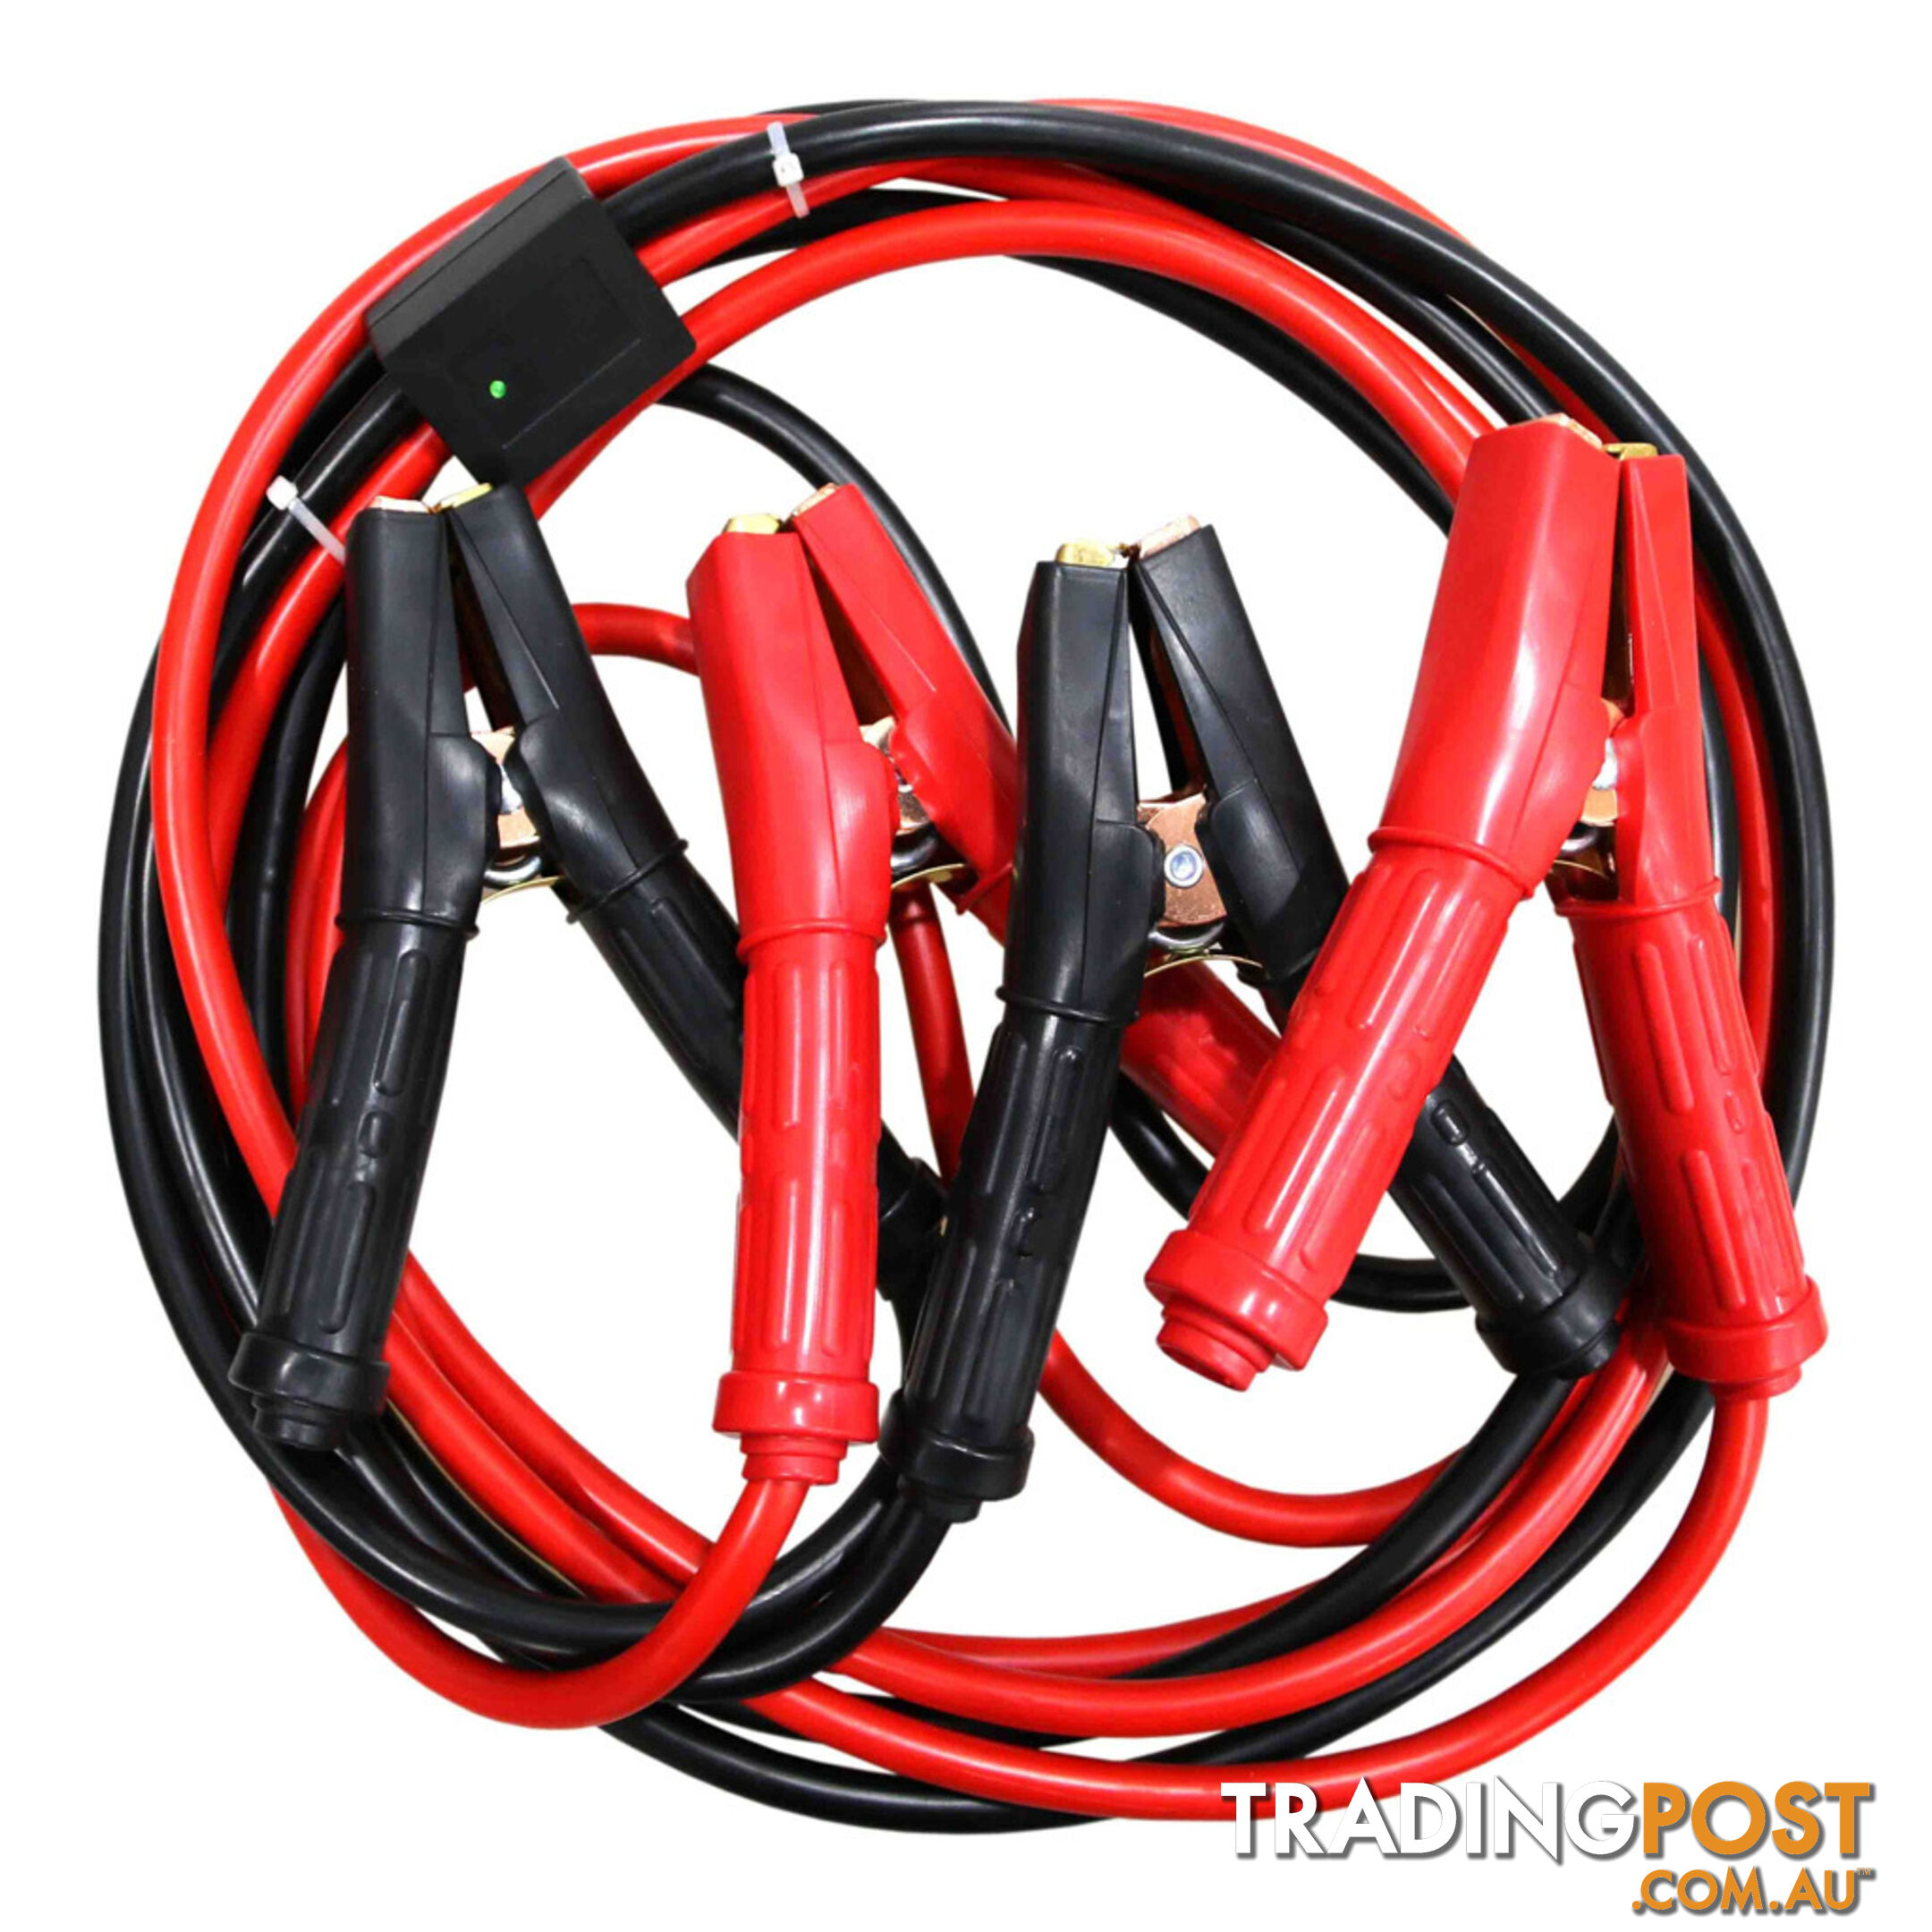 Charge Jump Booster Cables 1500a Superflex Surge Protected H/D 6.5m Long SKU - CH10101